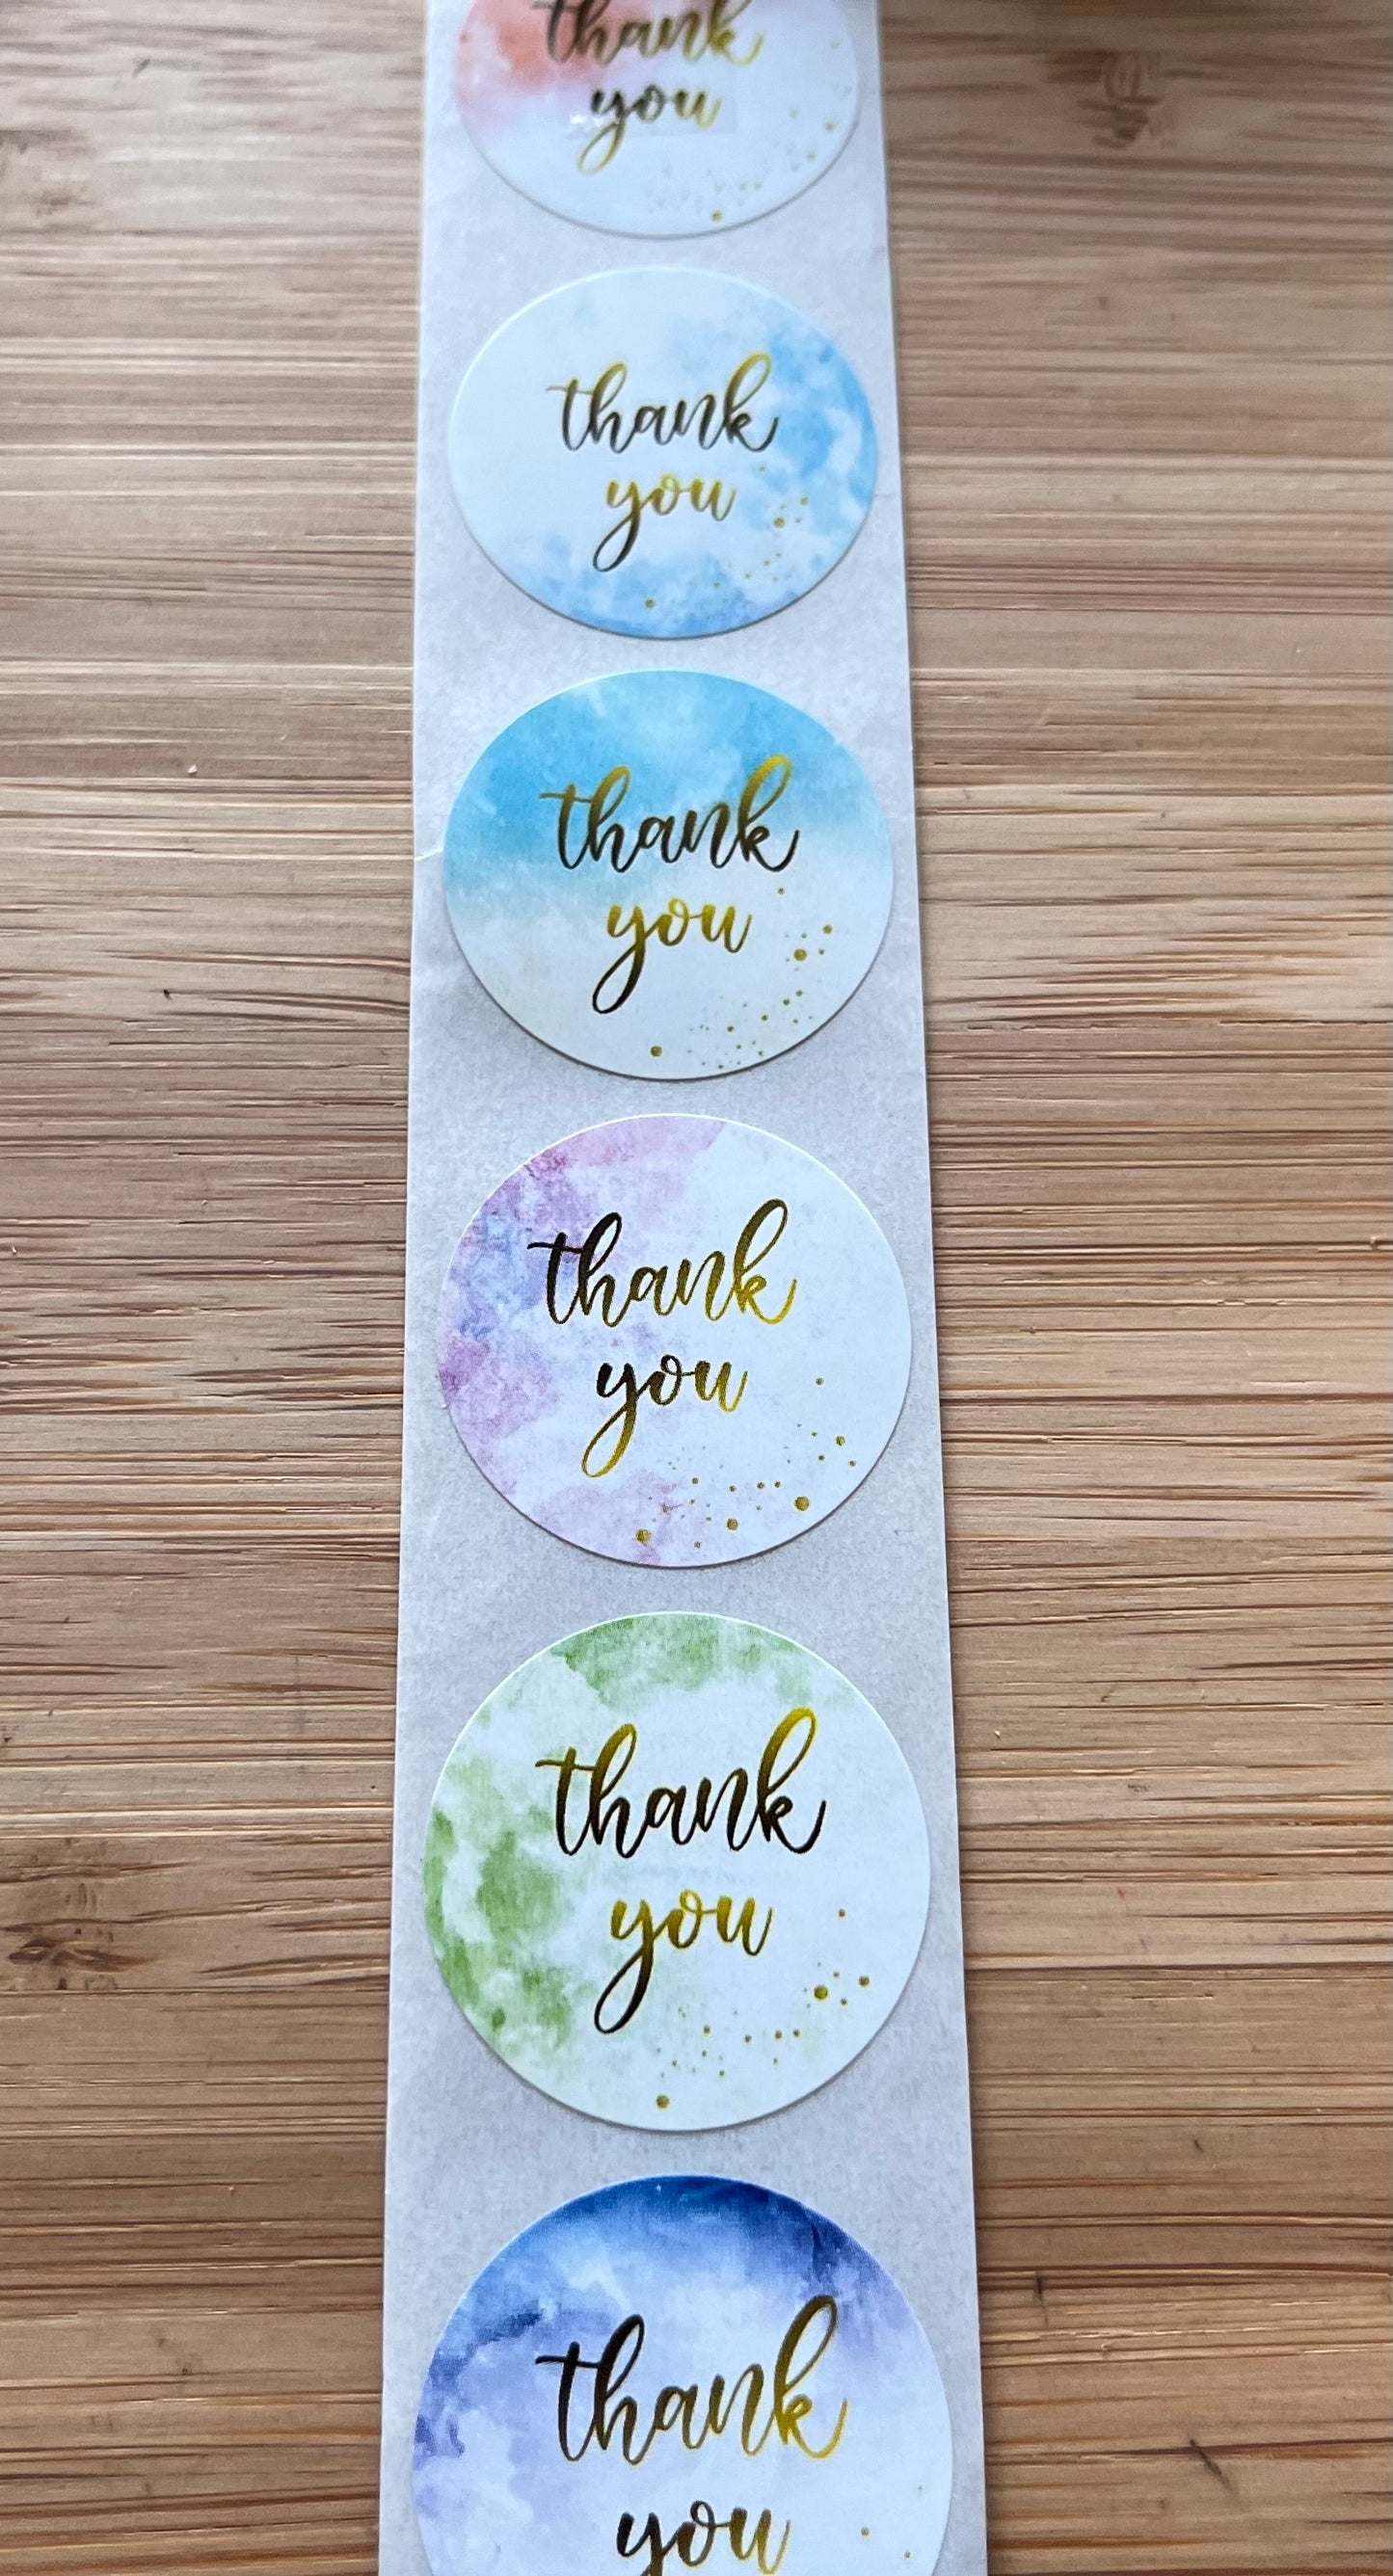 Thank you stickers with gold writing